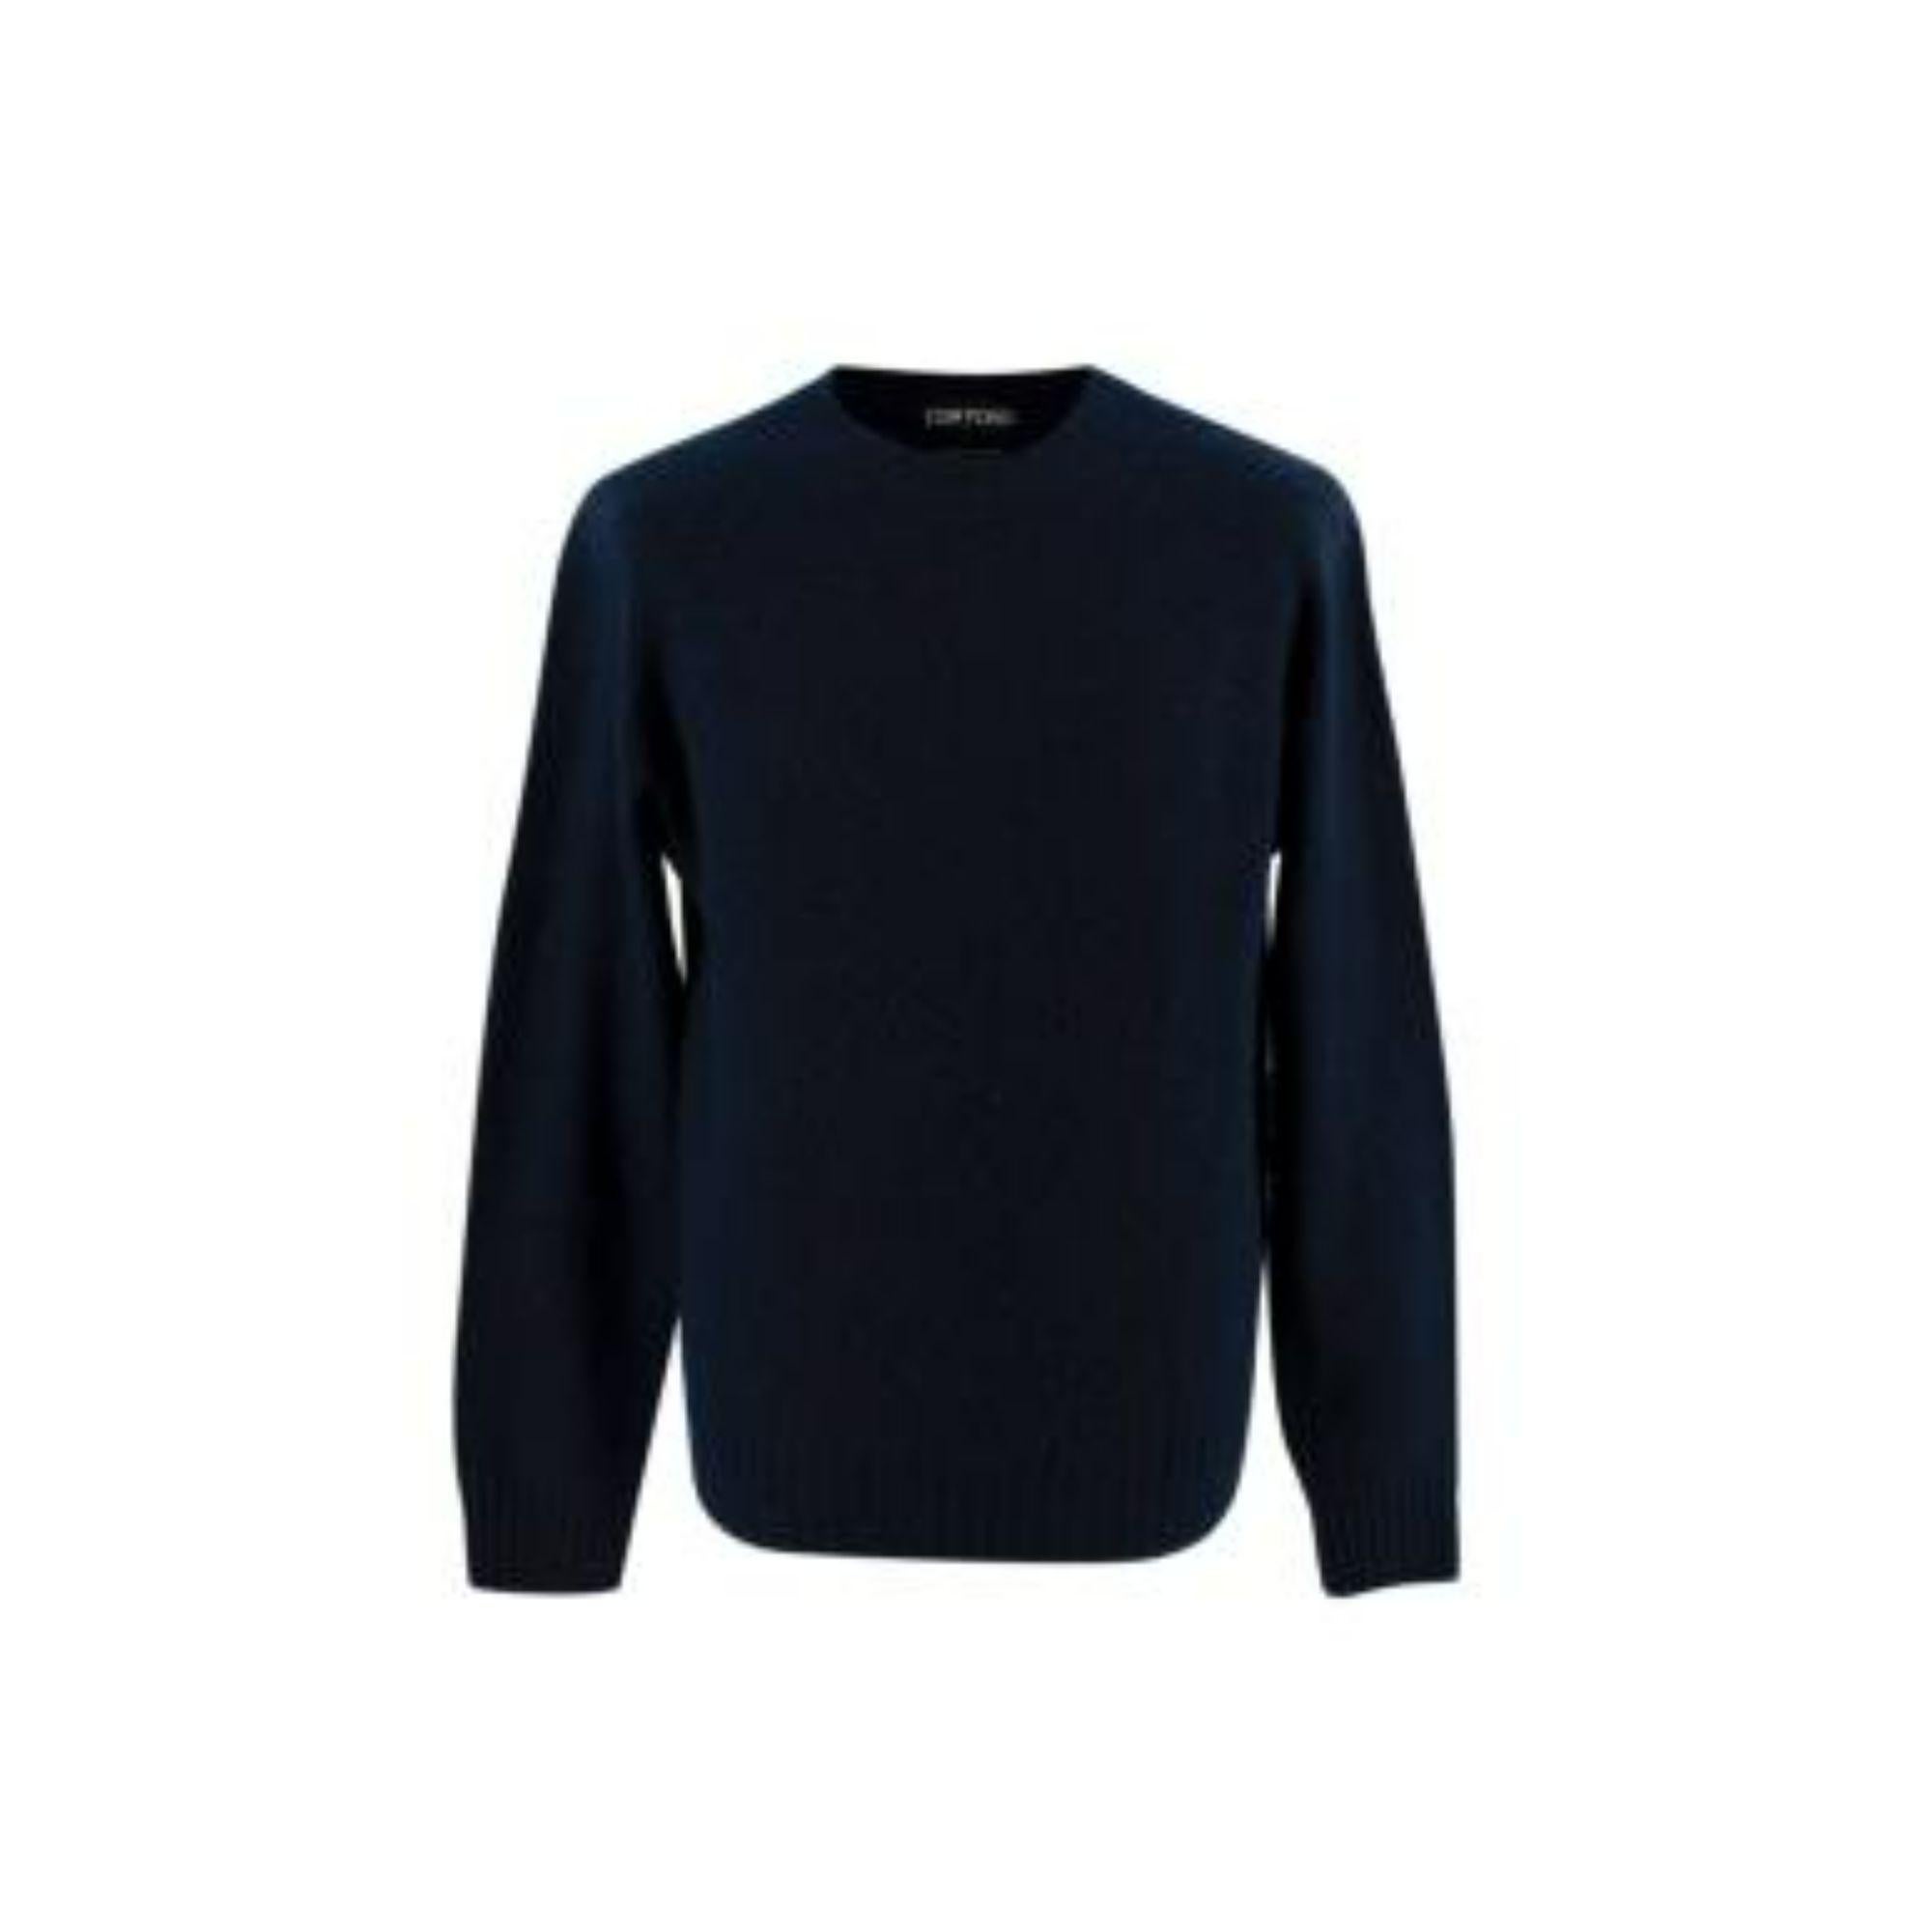 Tom Ford Navy Cashmere Jumper

- Round neckline
- Ribbed cuffs, neck, and waist
- Light construction

Material
100% Cashmere

Made in Great Britain

9.5/10 Excellent condition

PLEASE NOTE, THESE ITEMS ARE PRE-OWNED AND MAY SHOW SIGNS OF BEING